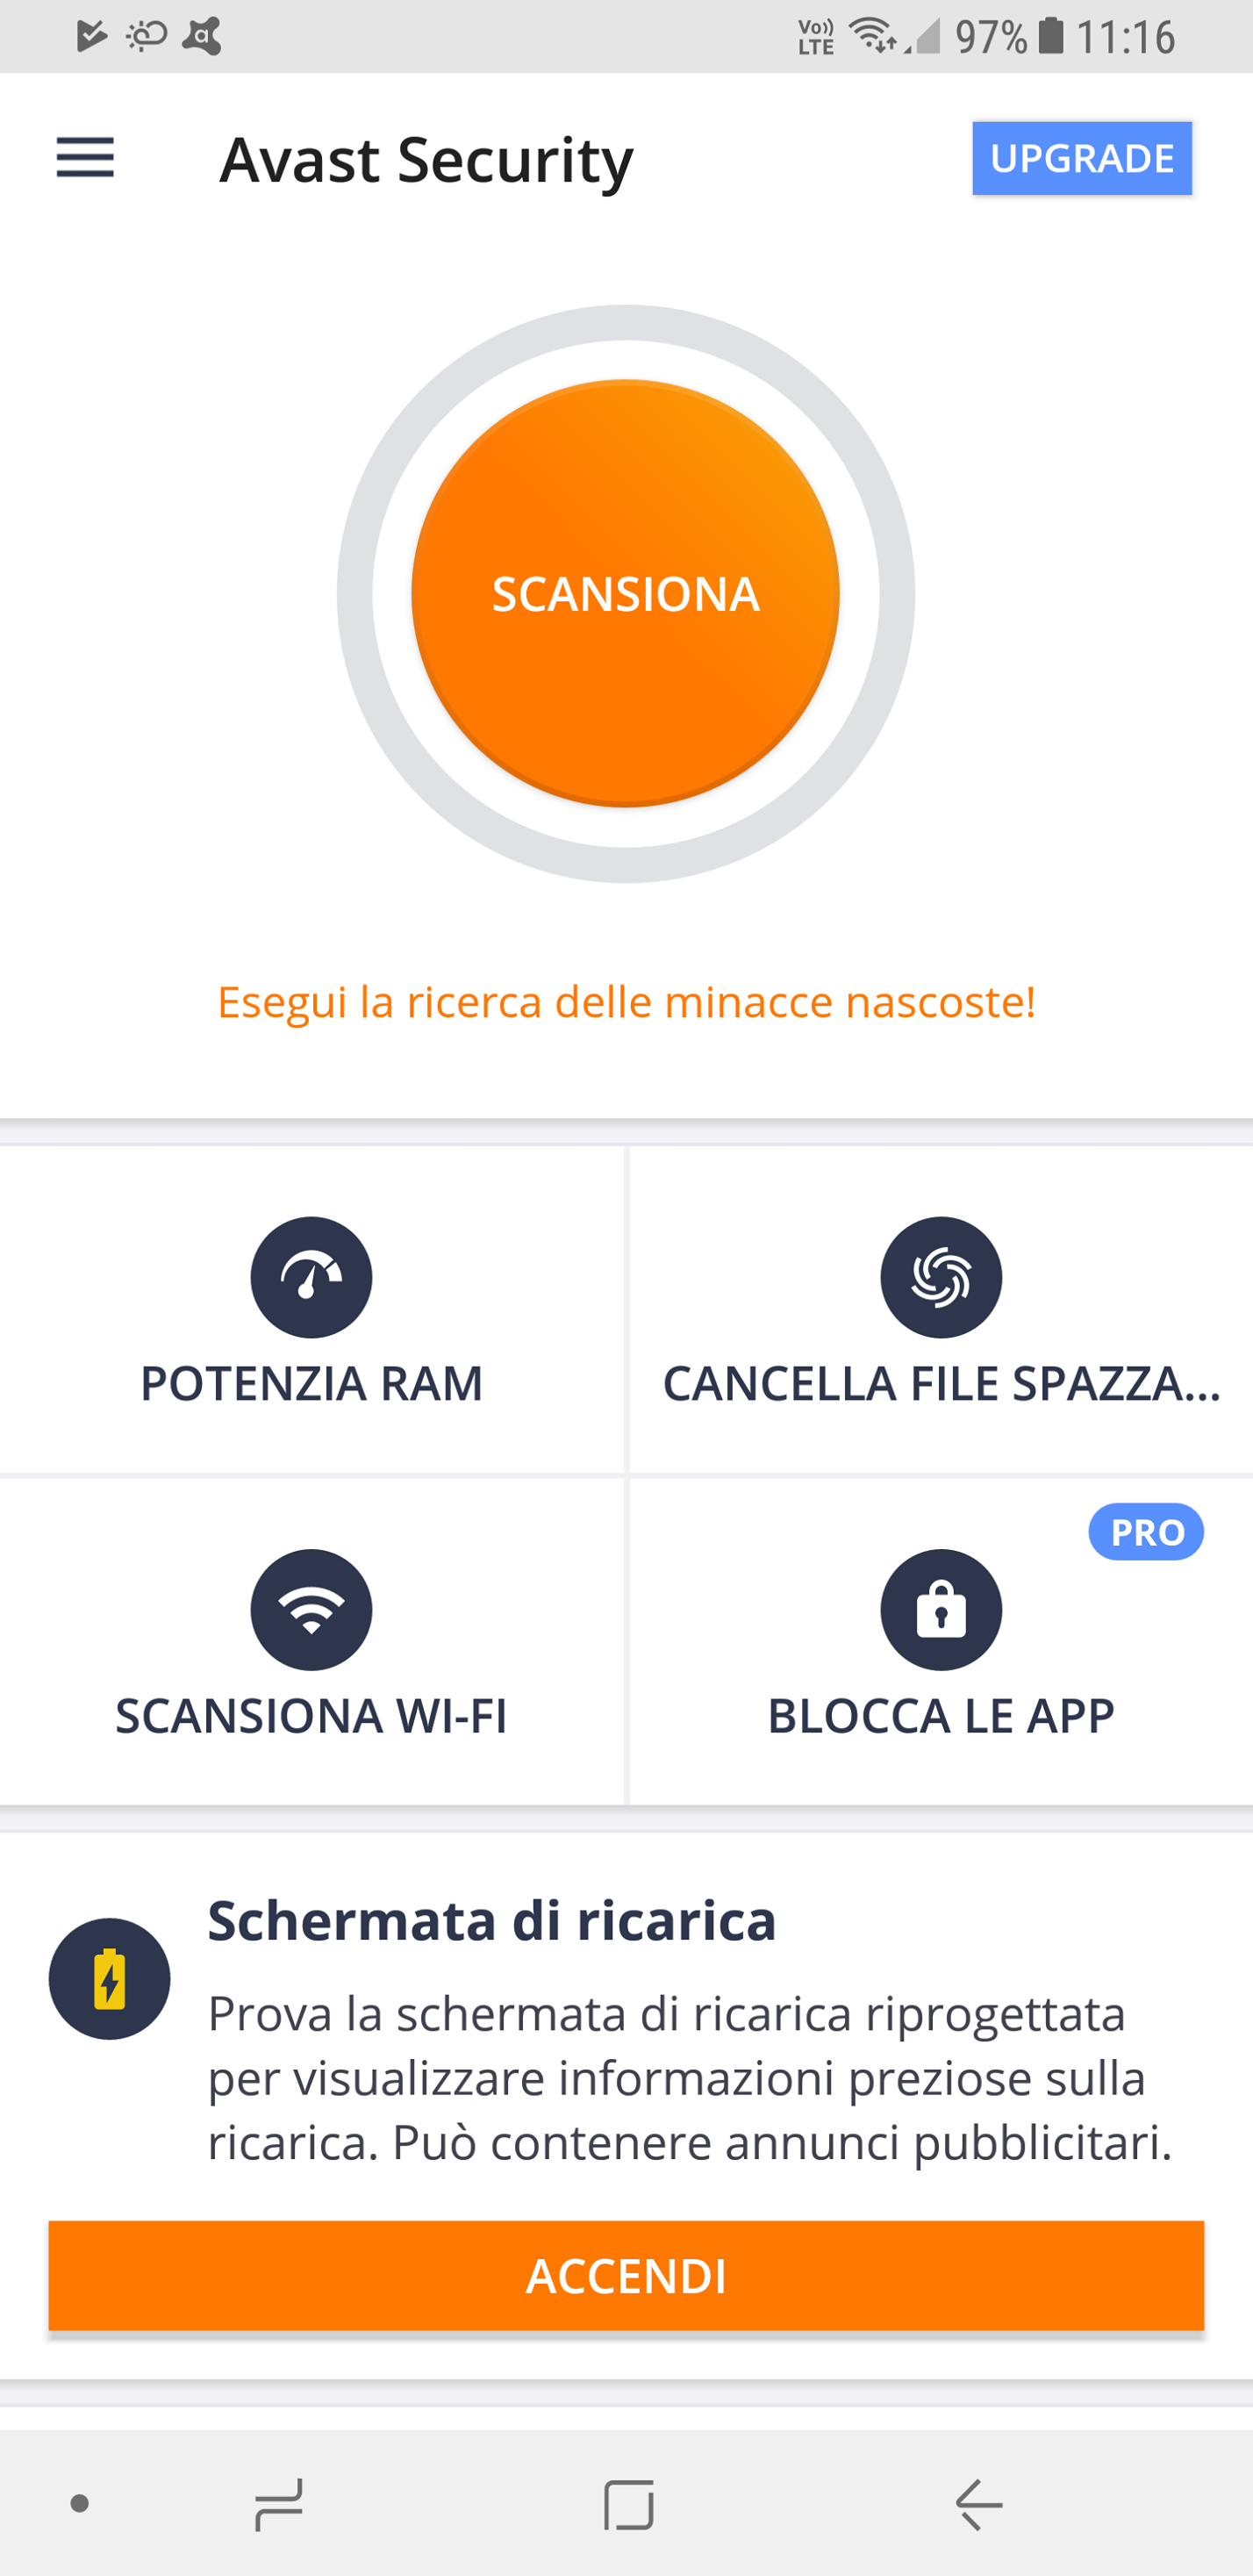 avast for android phone